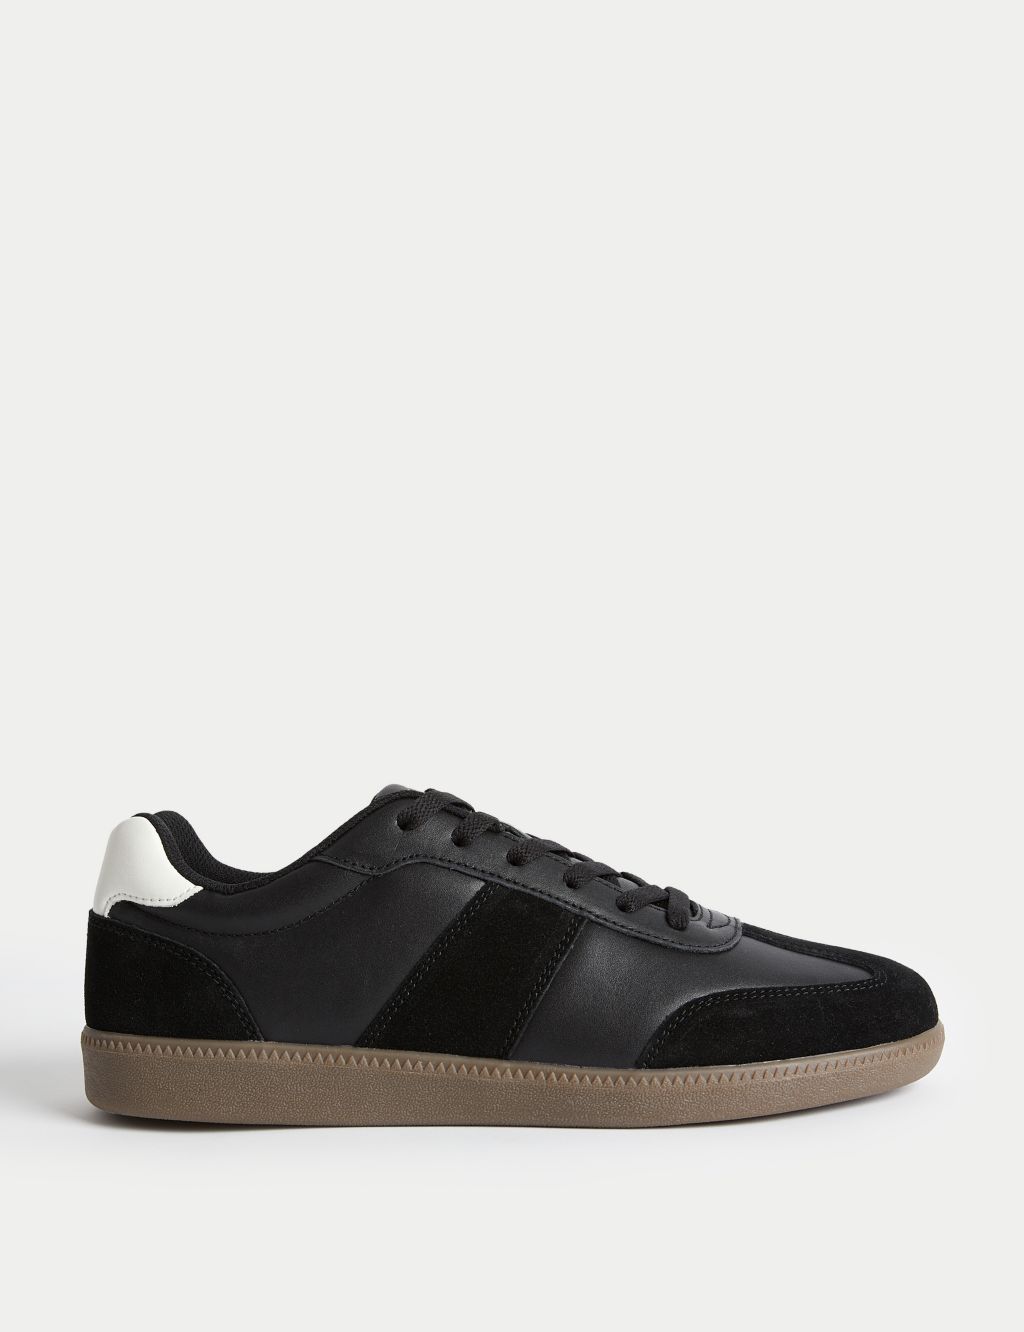 Leather Lace Up Trainers image 1